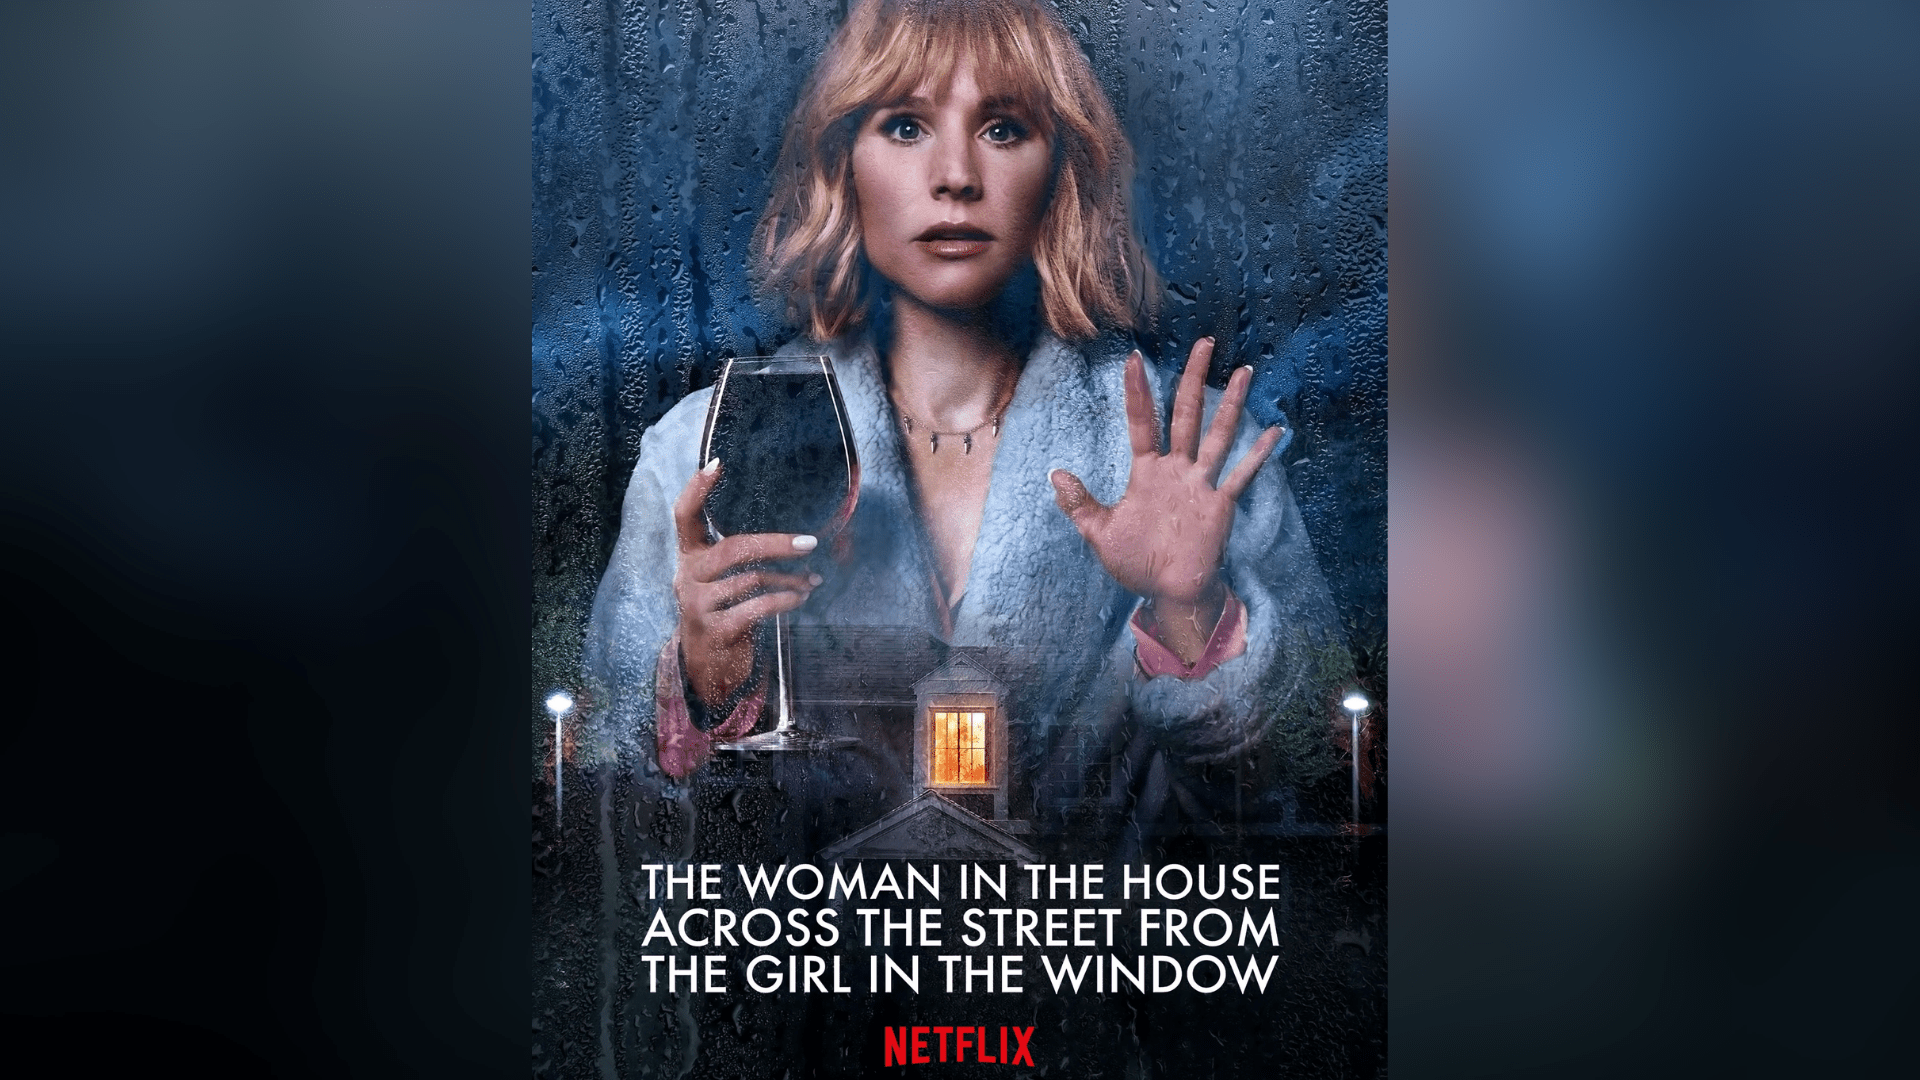 the woman in the house across the street from the girl in the window